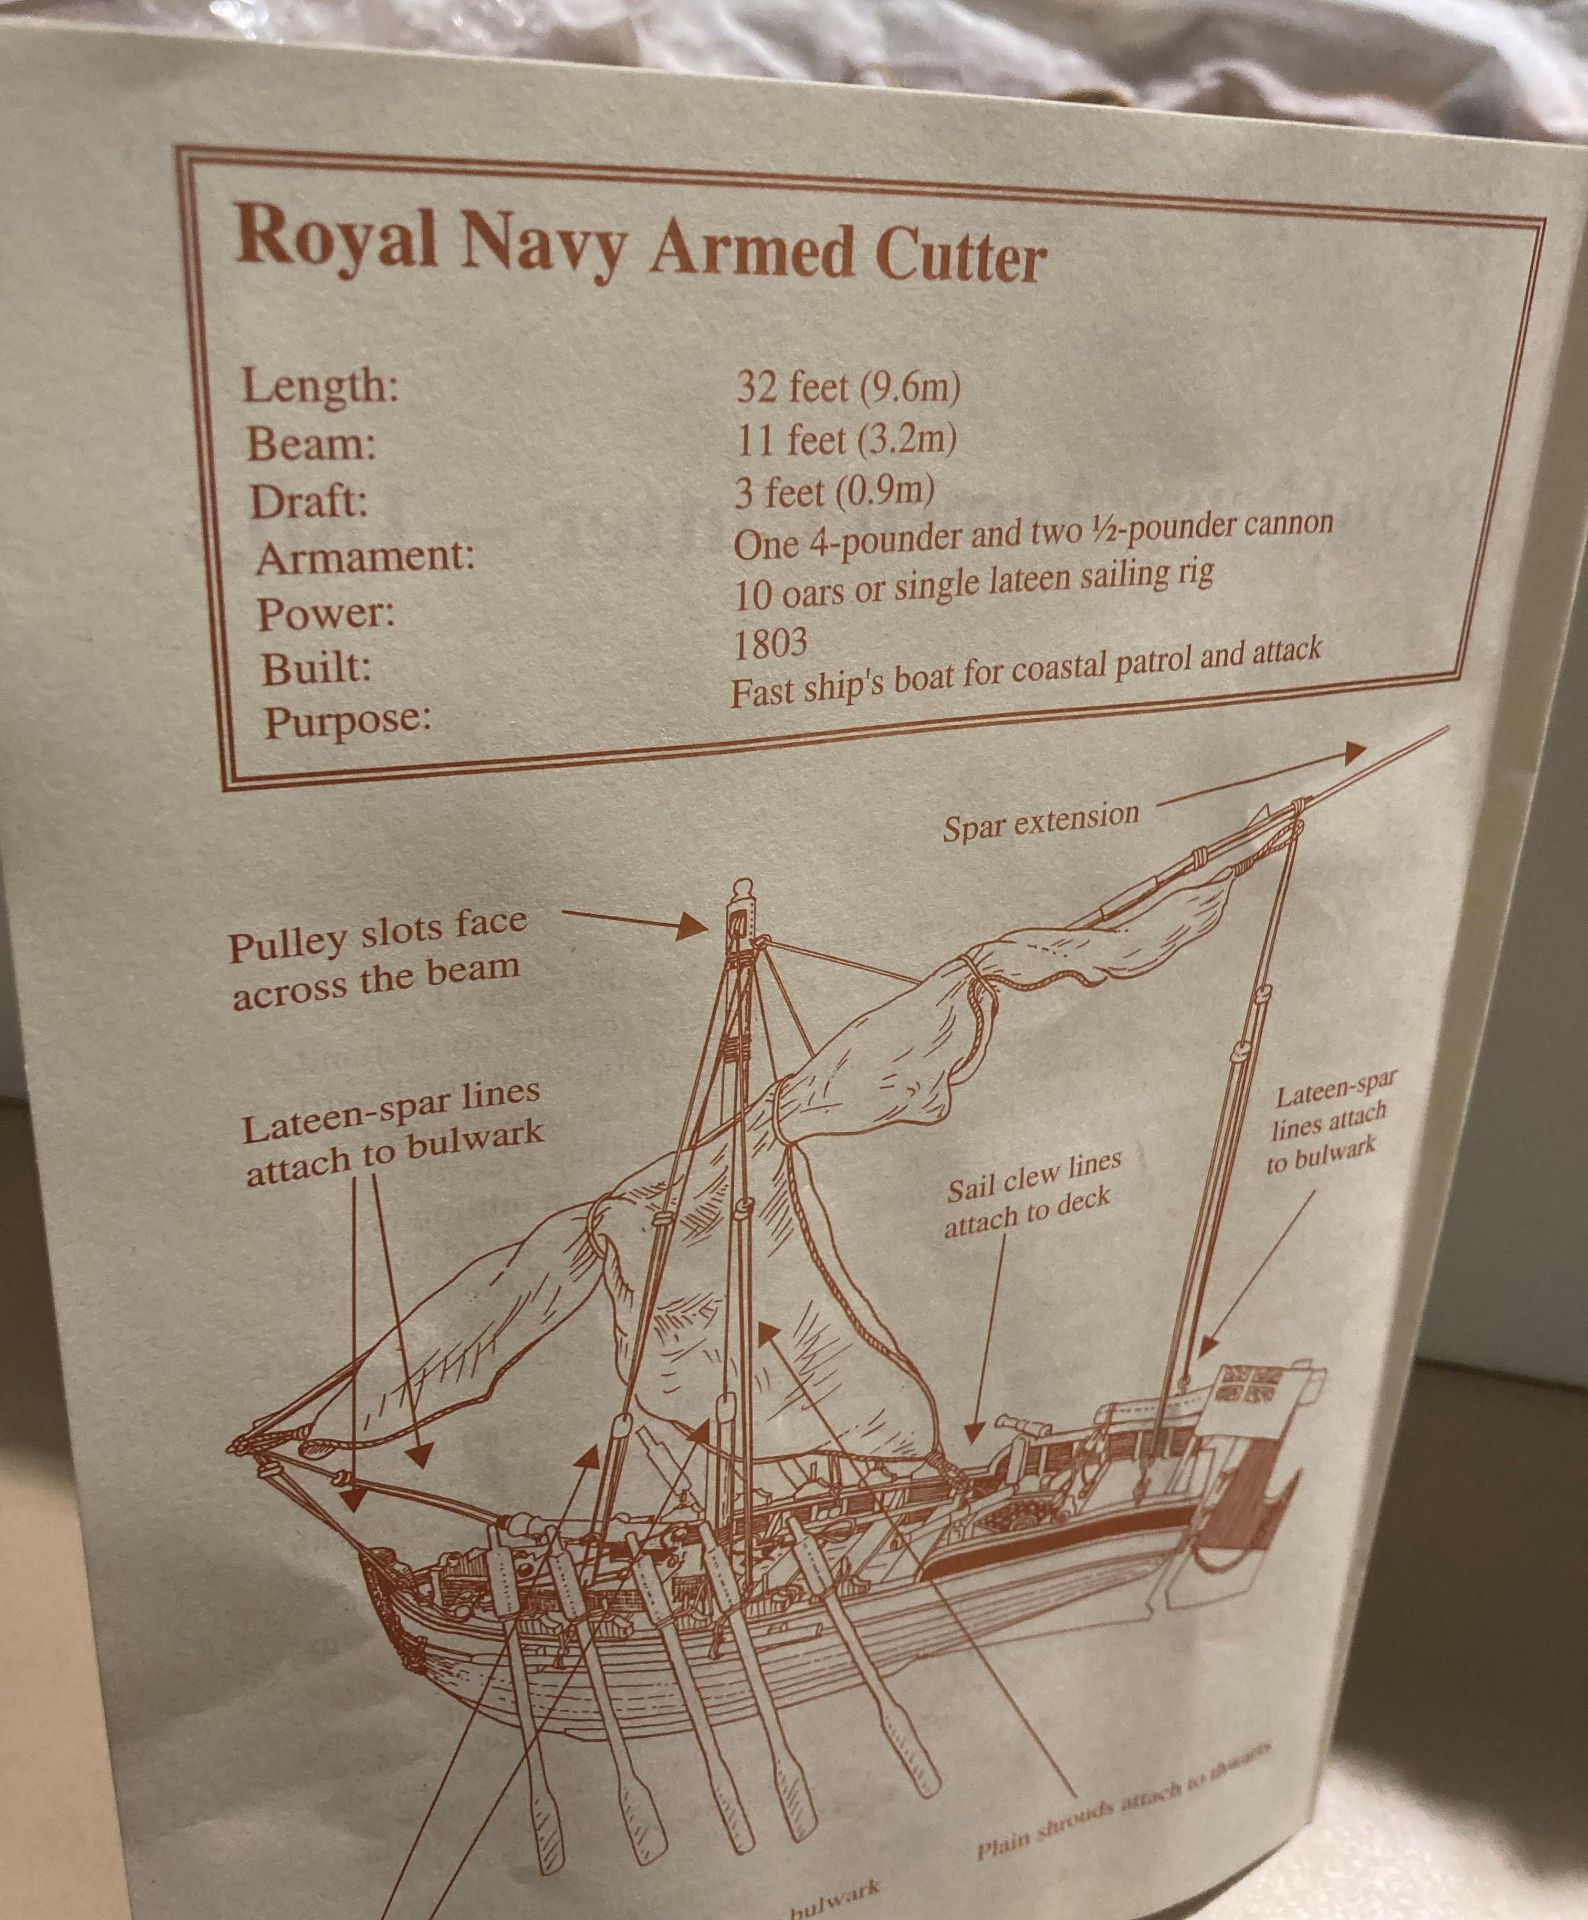 A boxed 7490 Royal Navy armed cutter display model by Nauticalia (saleroom location: S2 table - Image 2 of 3